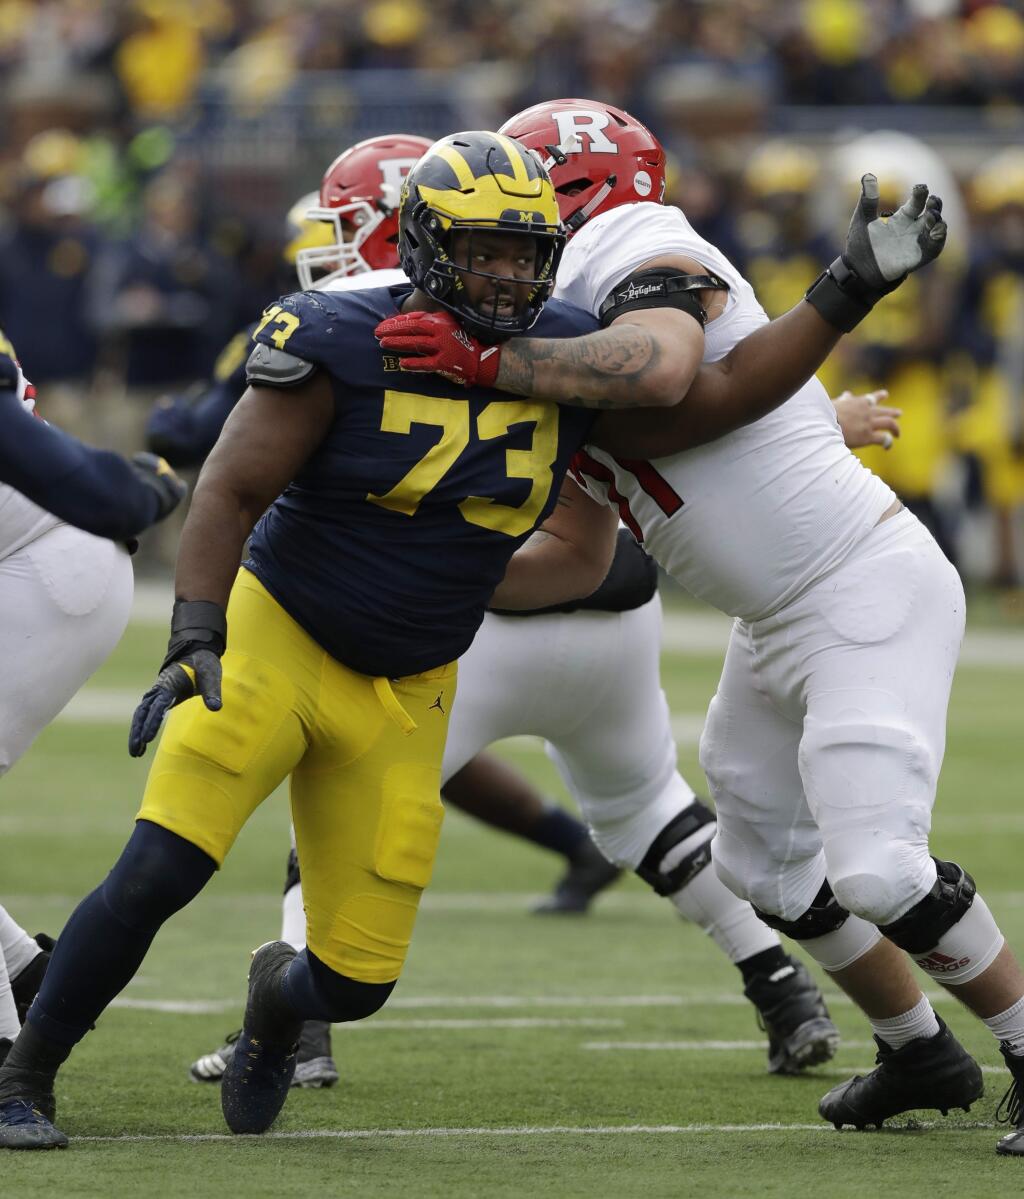 Michigan defensive lineman Maurice Hurst, left, goes up against Rutgers offensive lineman Marcus Applefield during the second half, Saturday, Oct. 28, 2017, in Ann Arbor, Mich. (AP Photo/Carlos Osorio)